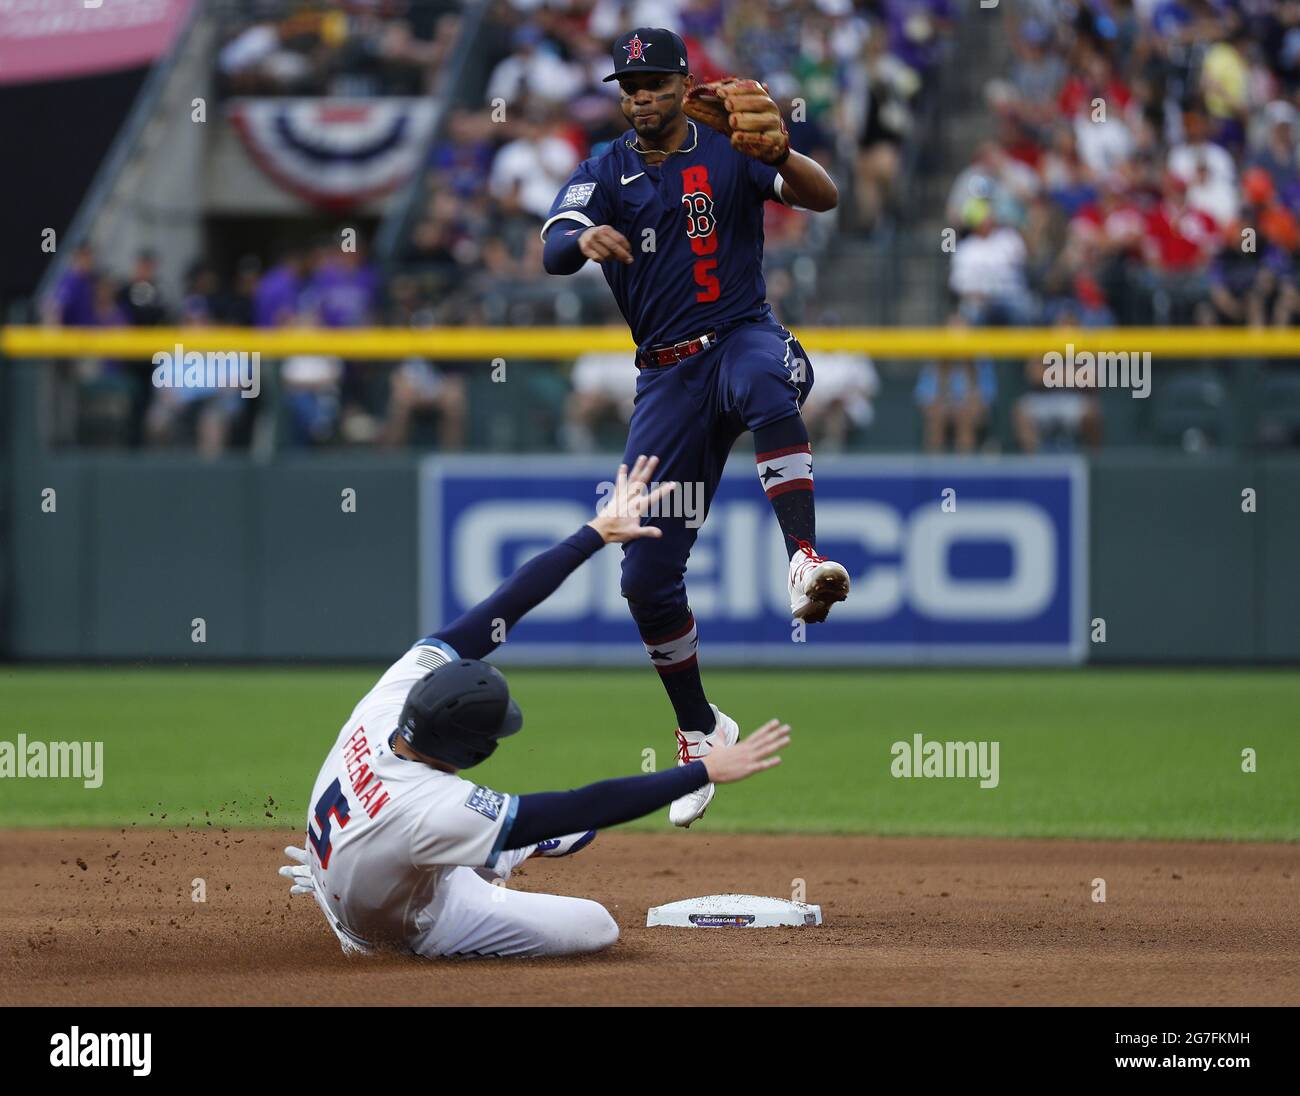 Denver, United States. 13th July, 2021. Boston Red Sox shortstop Xander Bogaerts leaps in the air to avoid a slide by Atlanta Braves first baseman Freddie Freeman in the fourth inning during the 2021 MLB All-Star Game at Coors Field in Denver, Colorado, on Tuesday, July 13, 2021. Photo by Bob Strong/UPI Credit: UPI/Alamy Live News Stock Photo